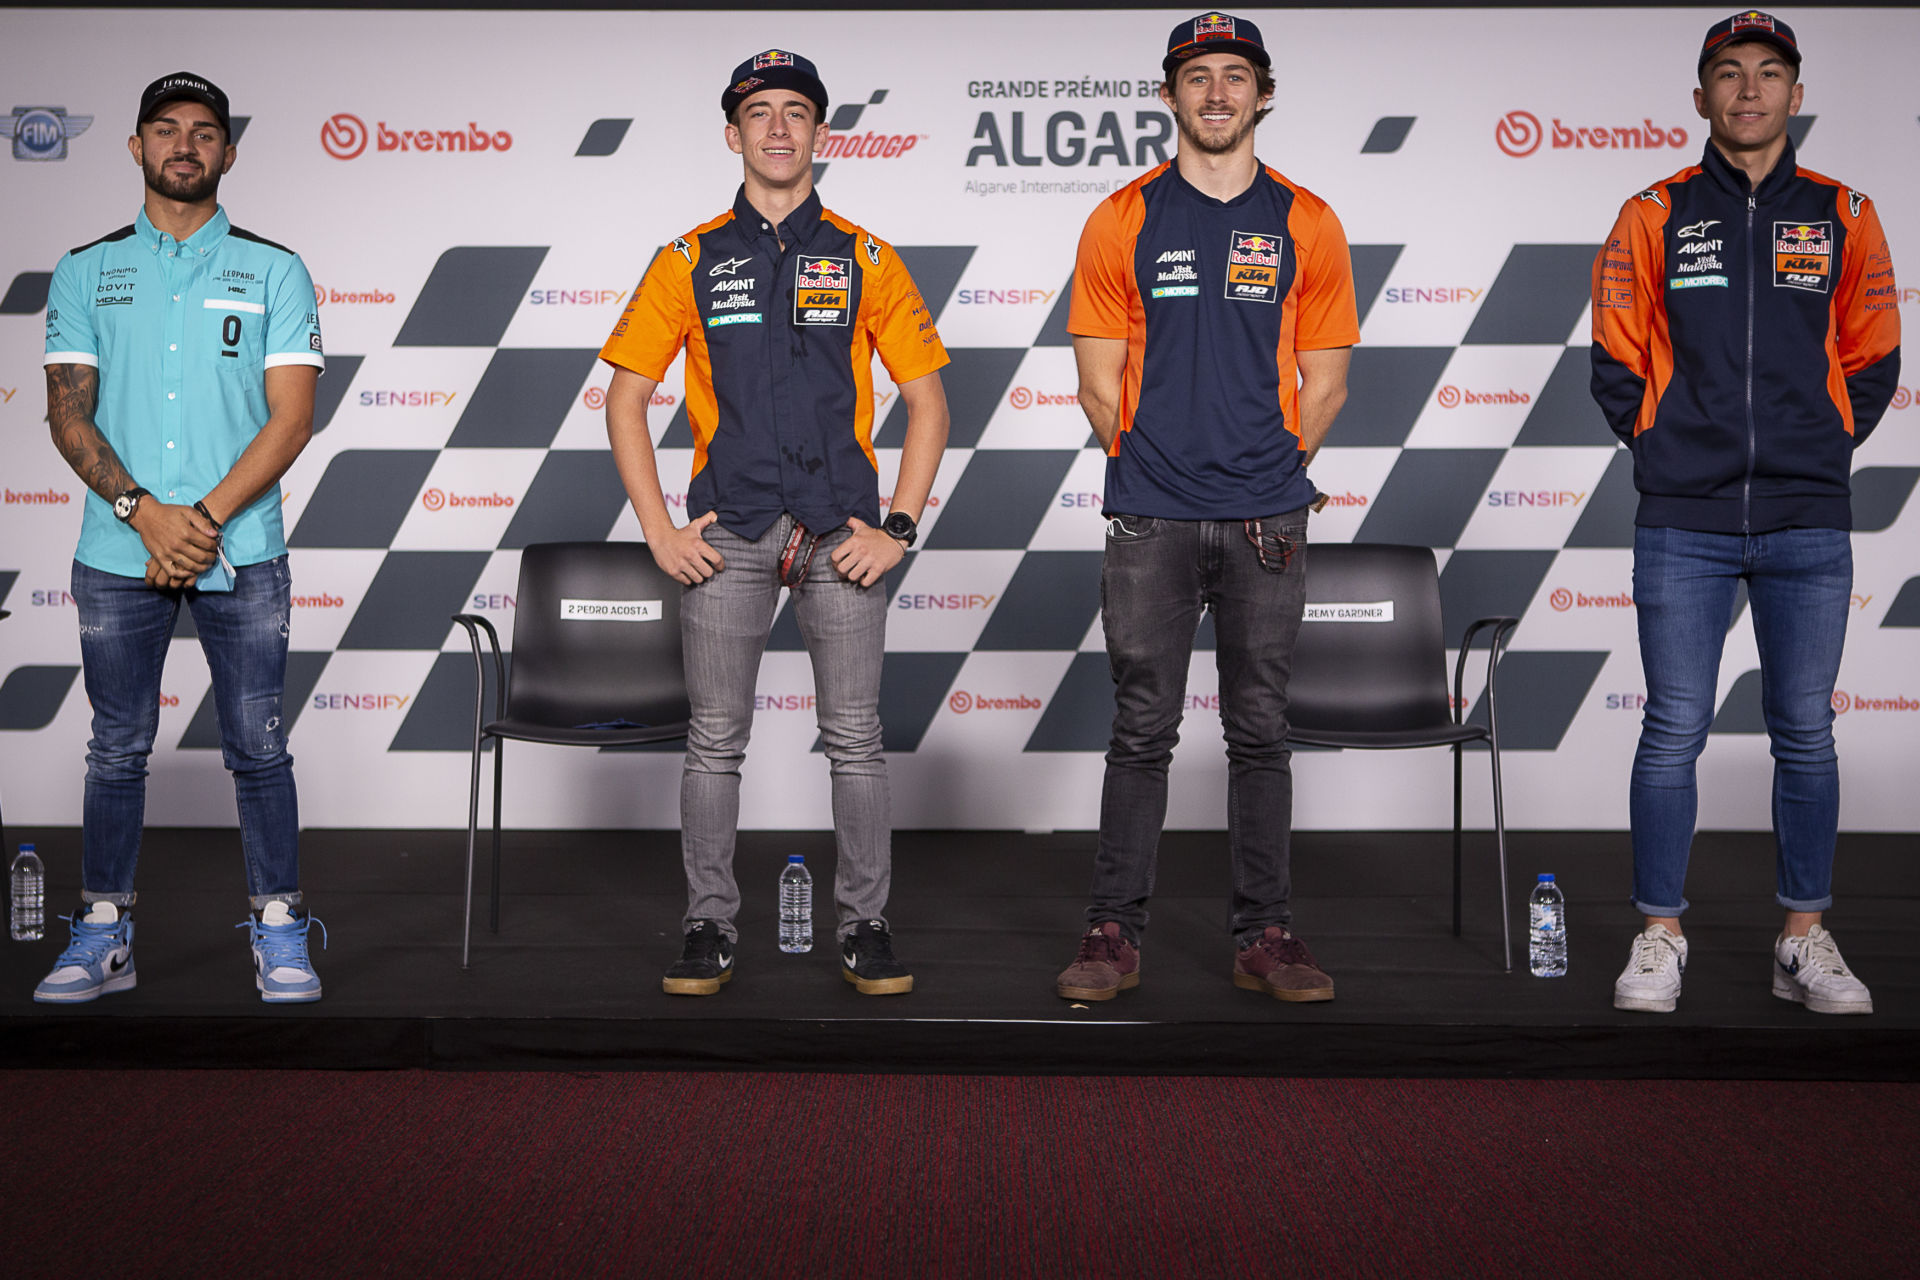 Moto2 title contenders Remy Gardner (second from right) and Raul Fernandez (far right) with Moto3 title contenders Pedro Acosta (second from left) and Dennis Foggia (far left) in Portugal. Photo courtesy Dorna.